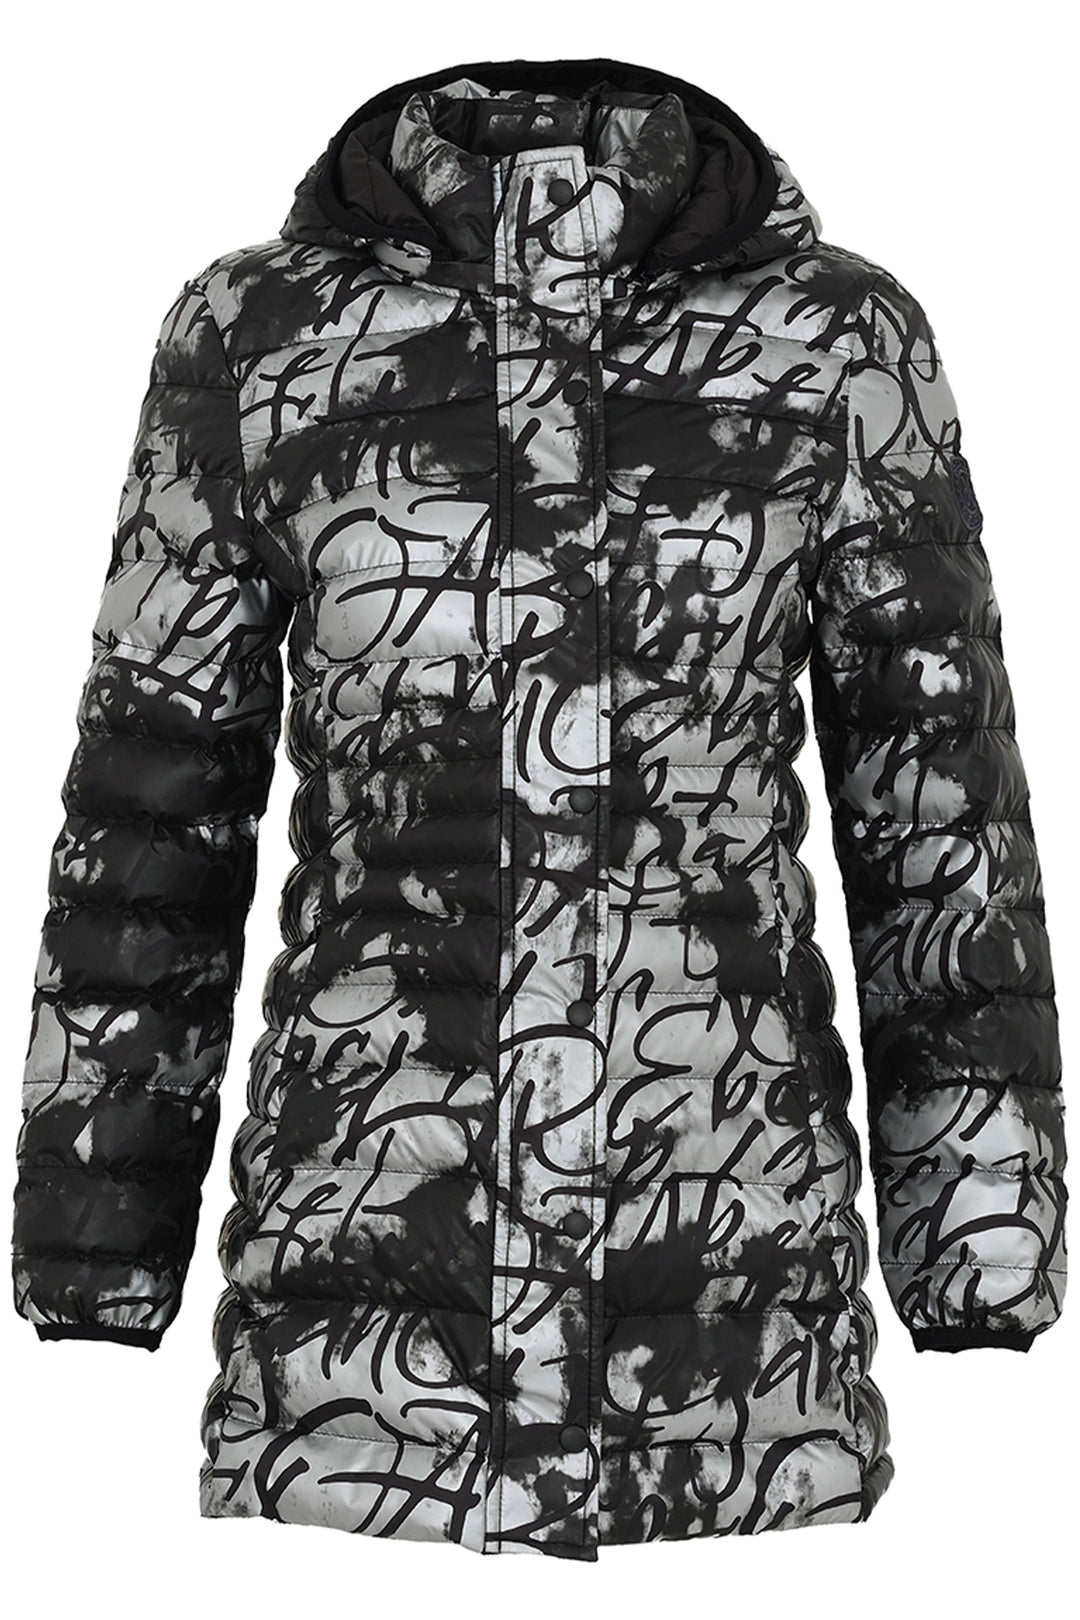 POETRY PUFFY JACKET